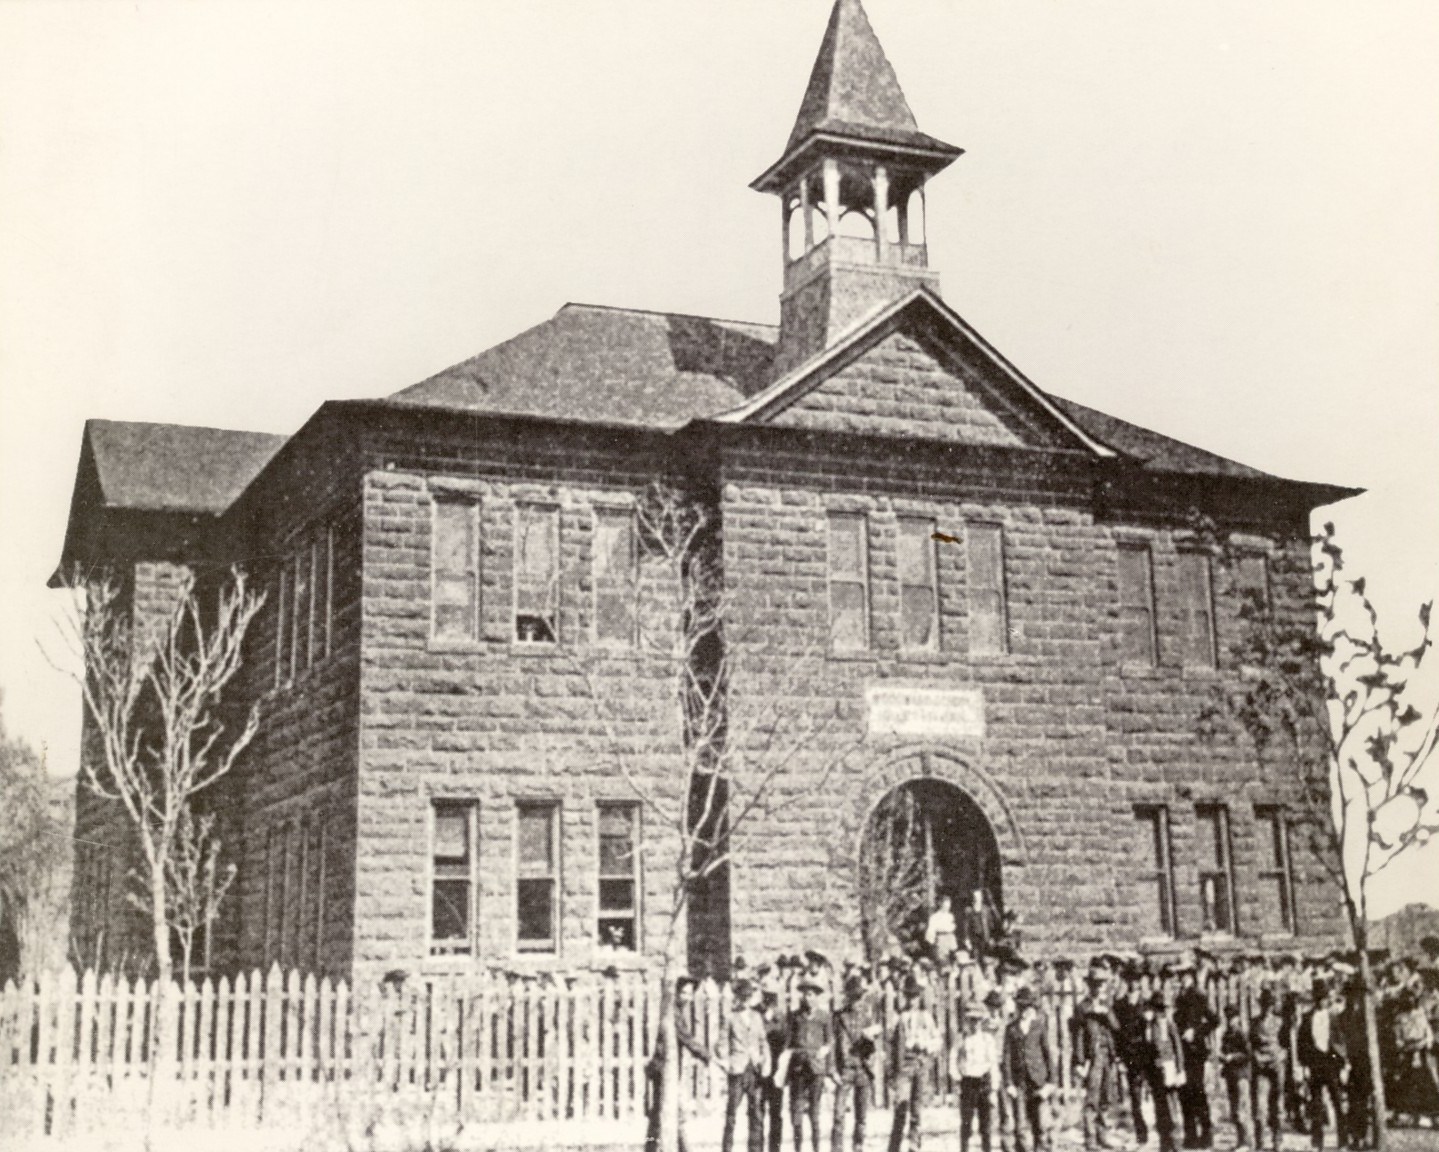 Group of people in front of the Woodward School